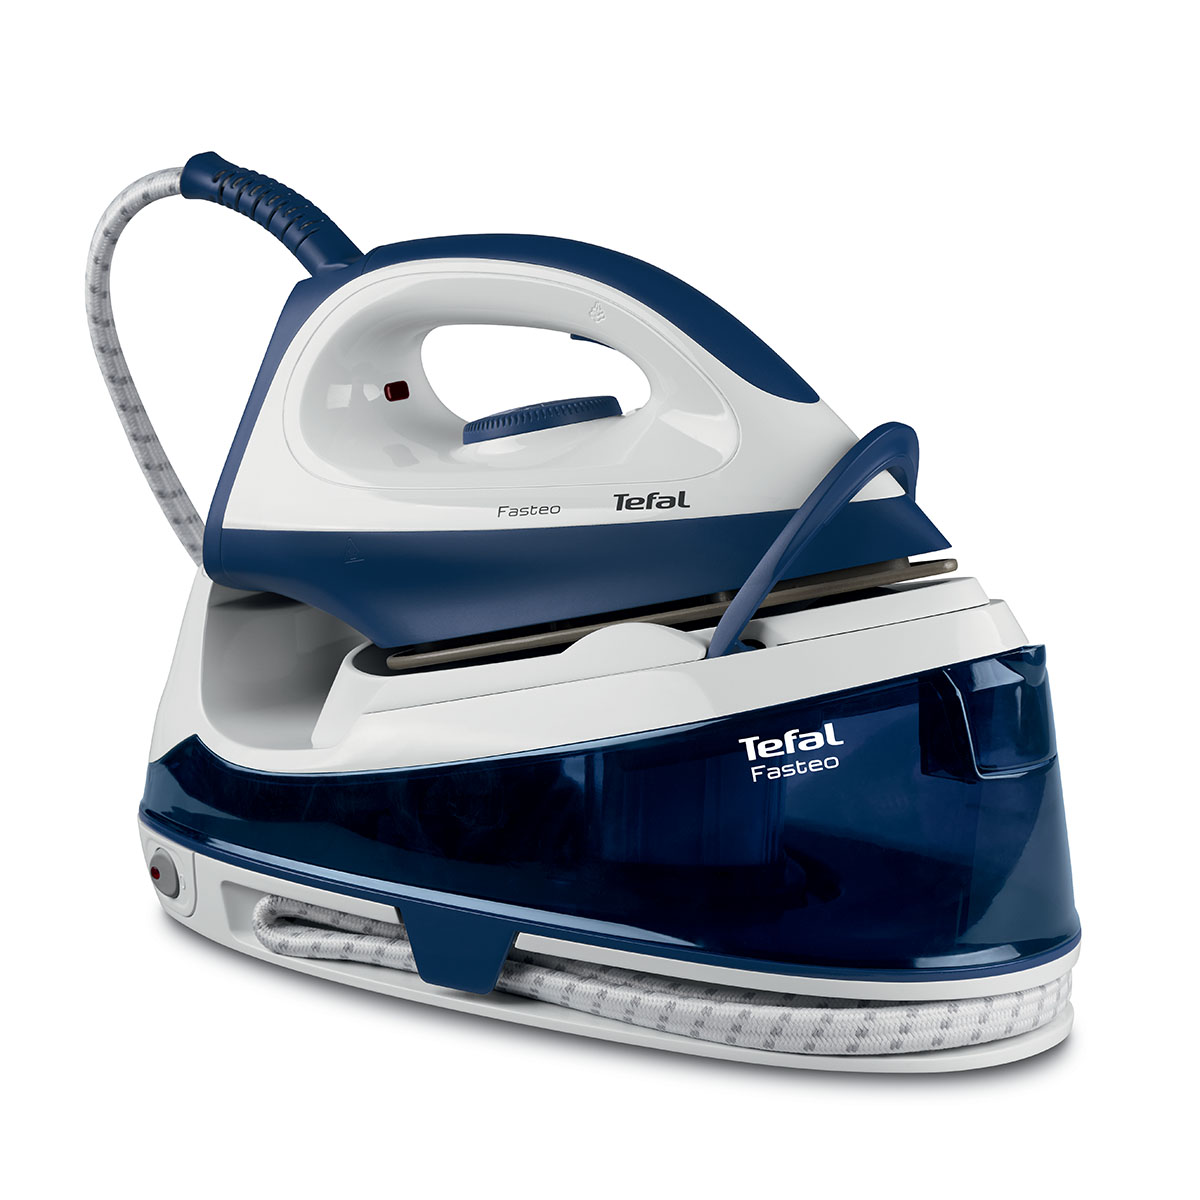 Tefal SV6040 Fasteo 2200W Steam Generator Iron - Blue and White